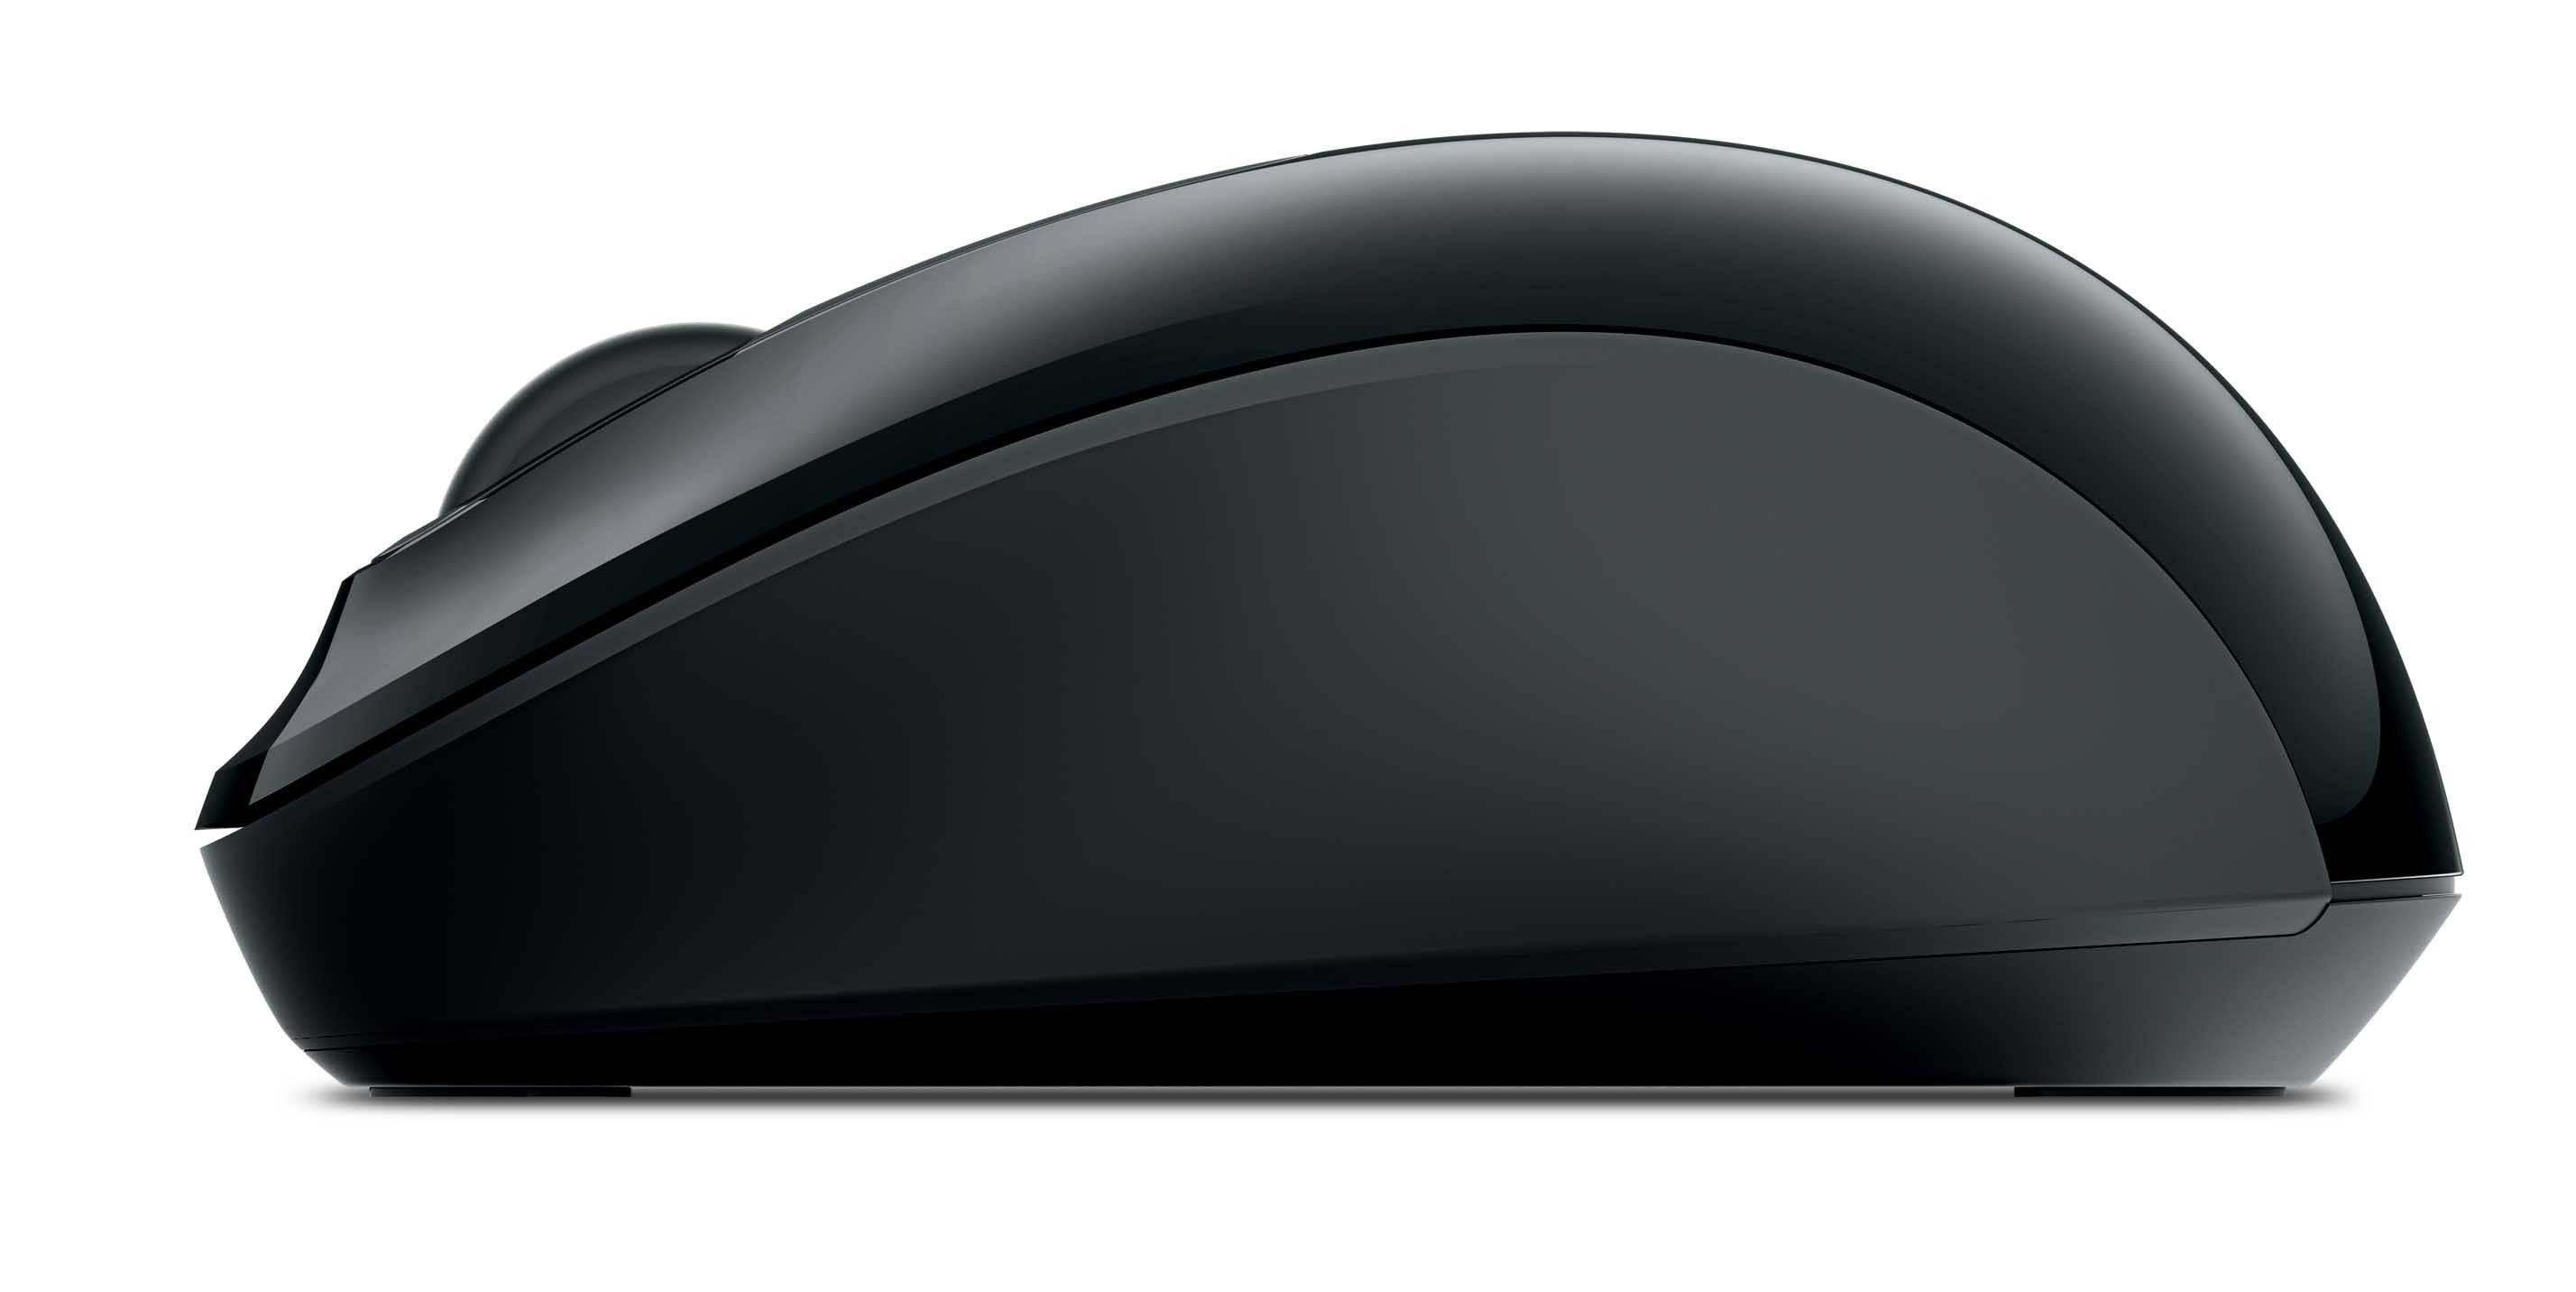 Microsoft breeds new generation of Windows 8-compatible mice